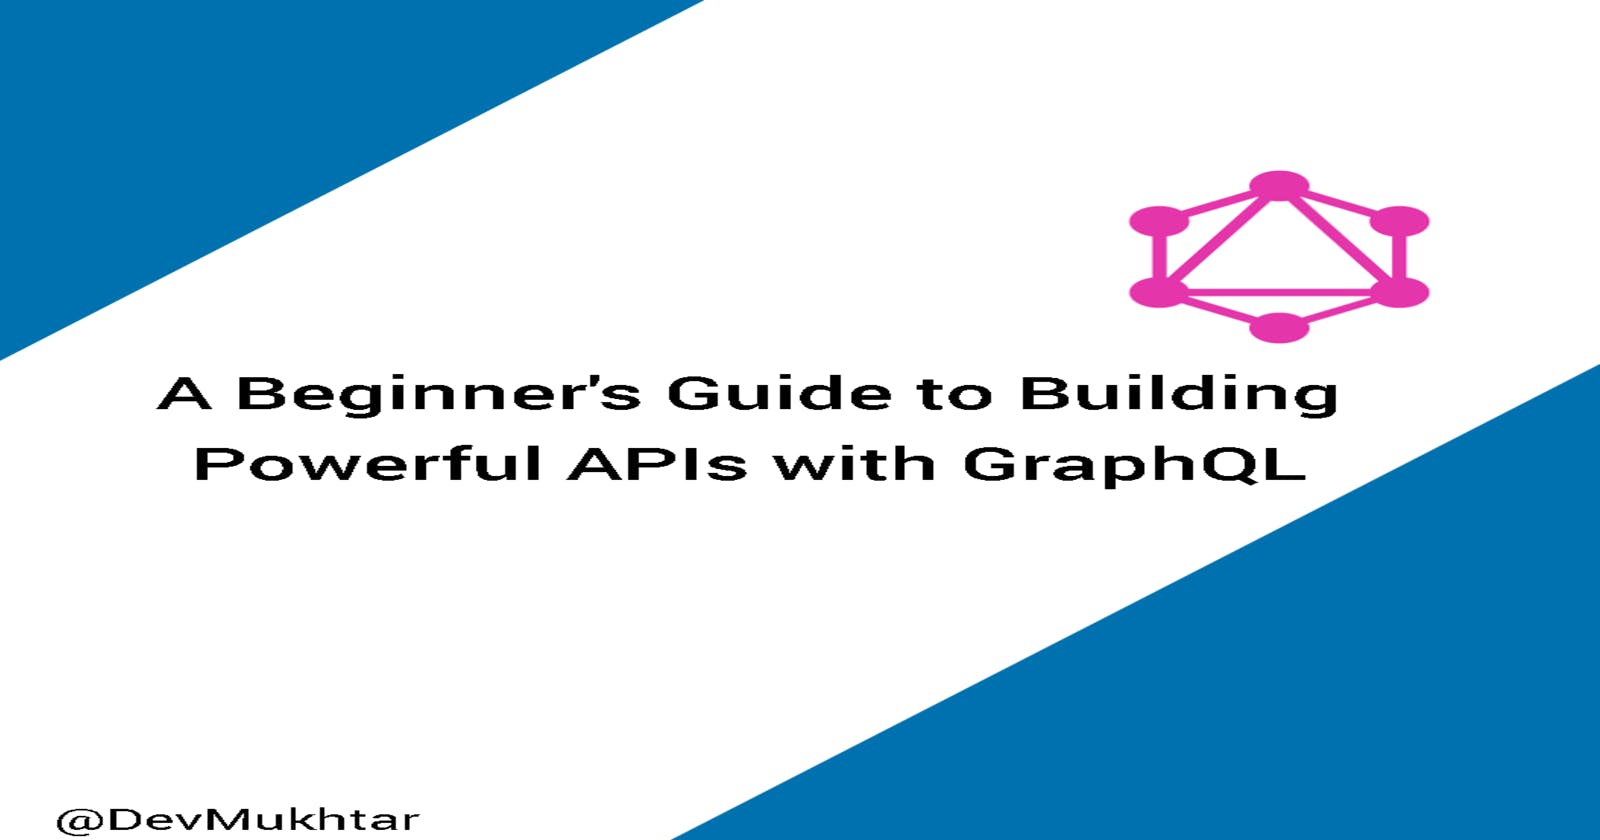 A Beginner's Guide to Building Powerful APIs with GraphQL